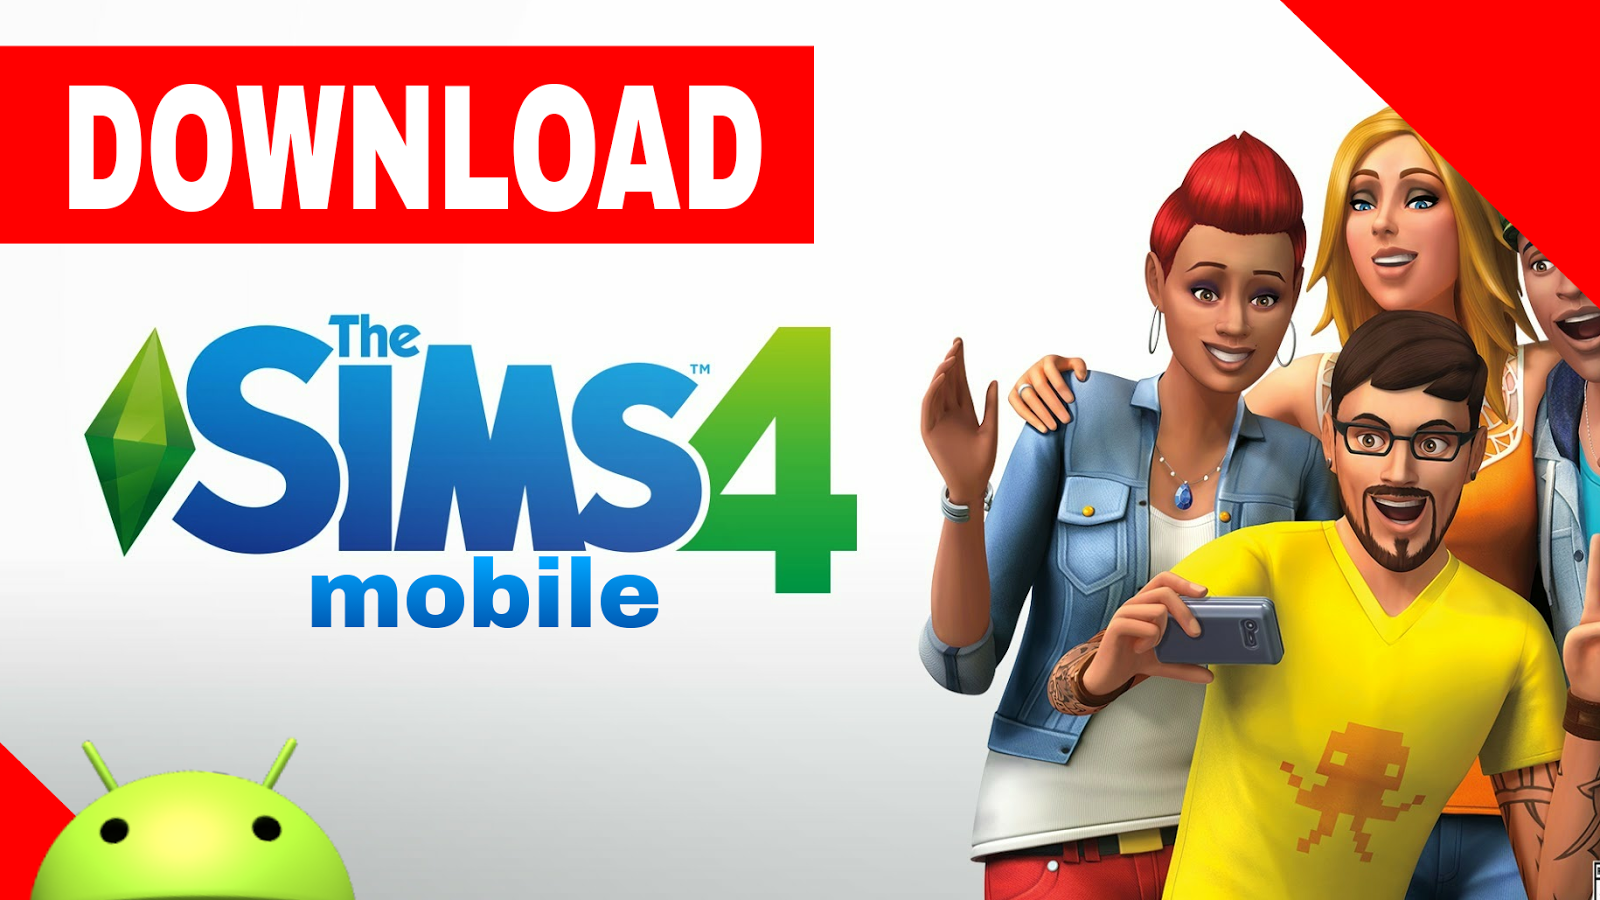 sims 4 android